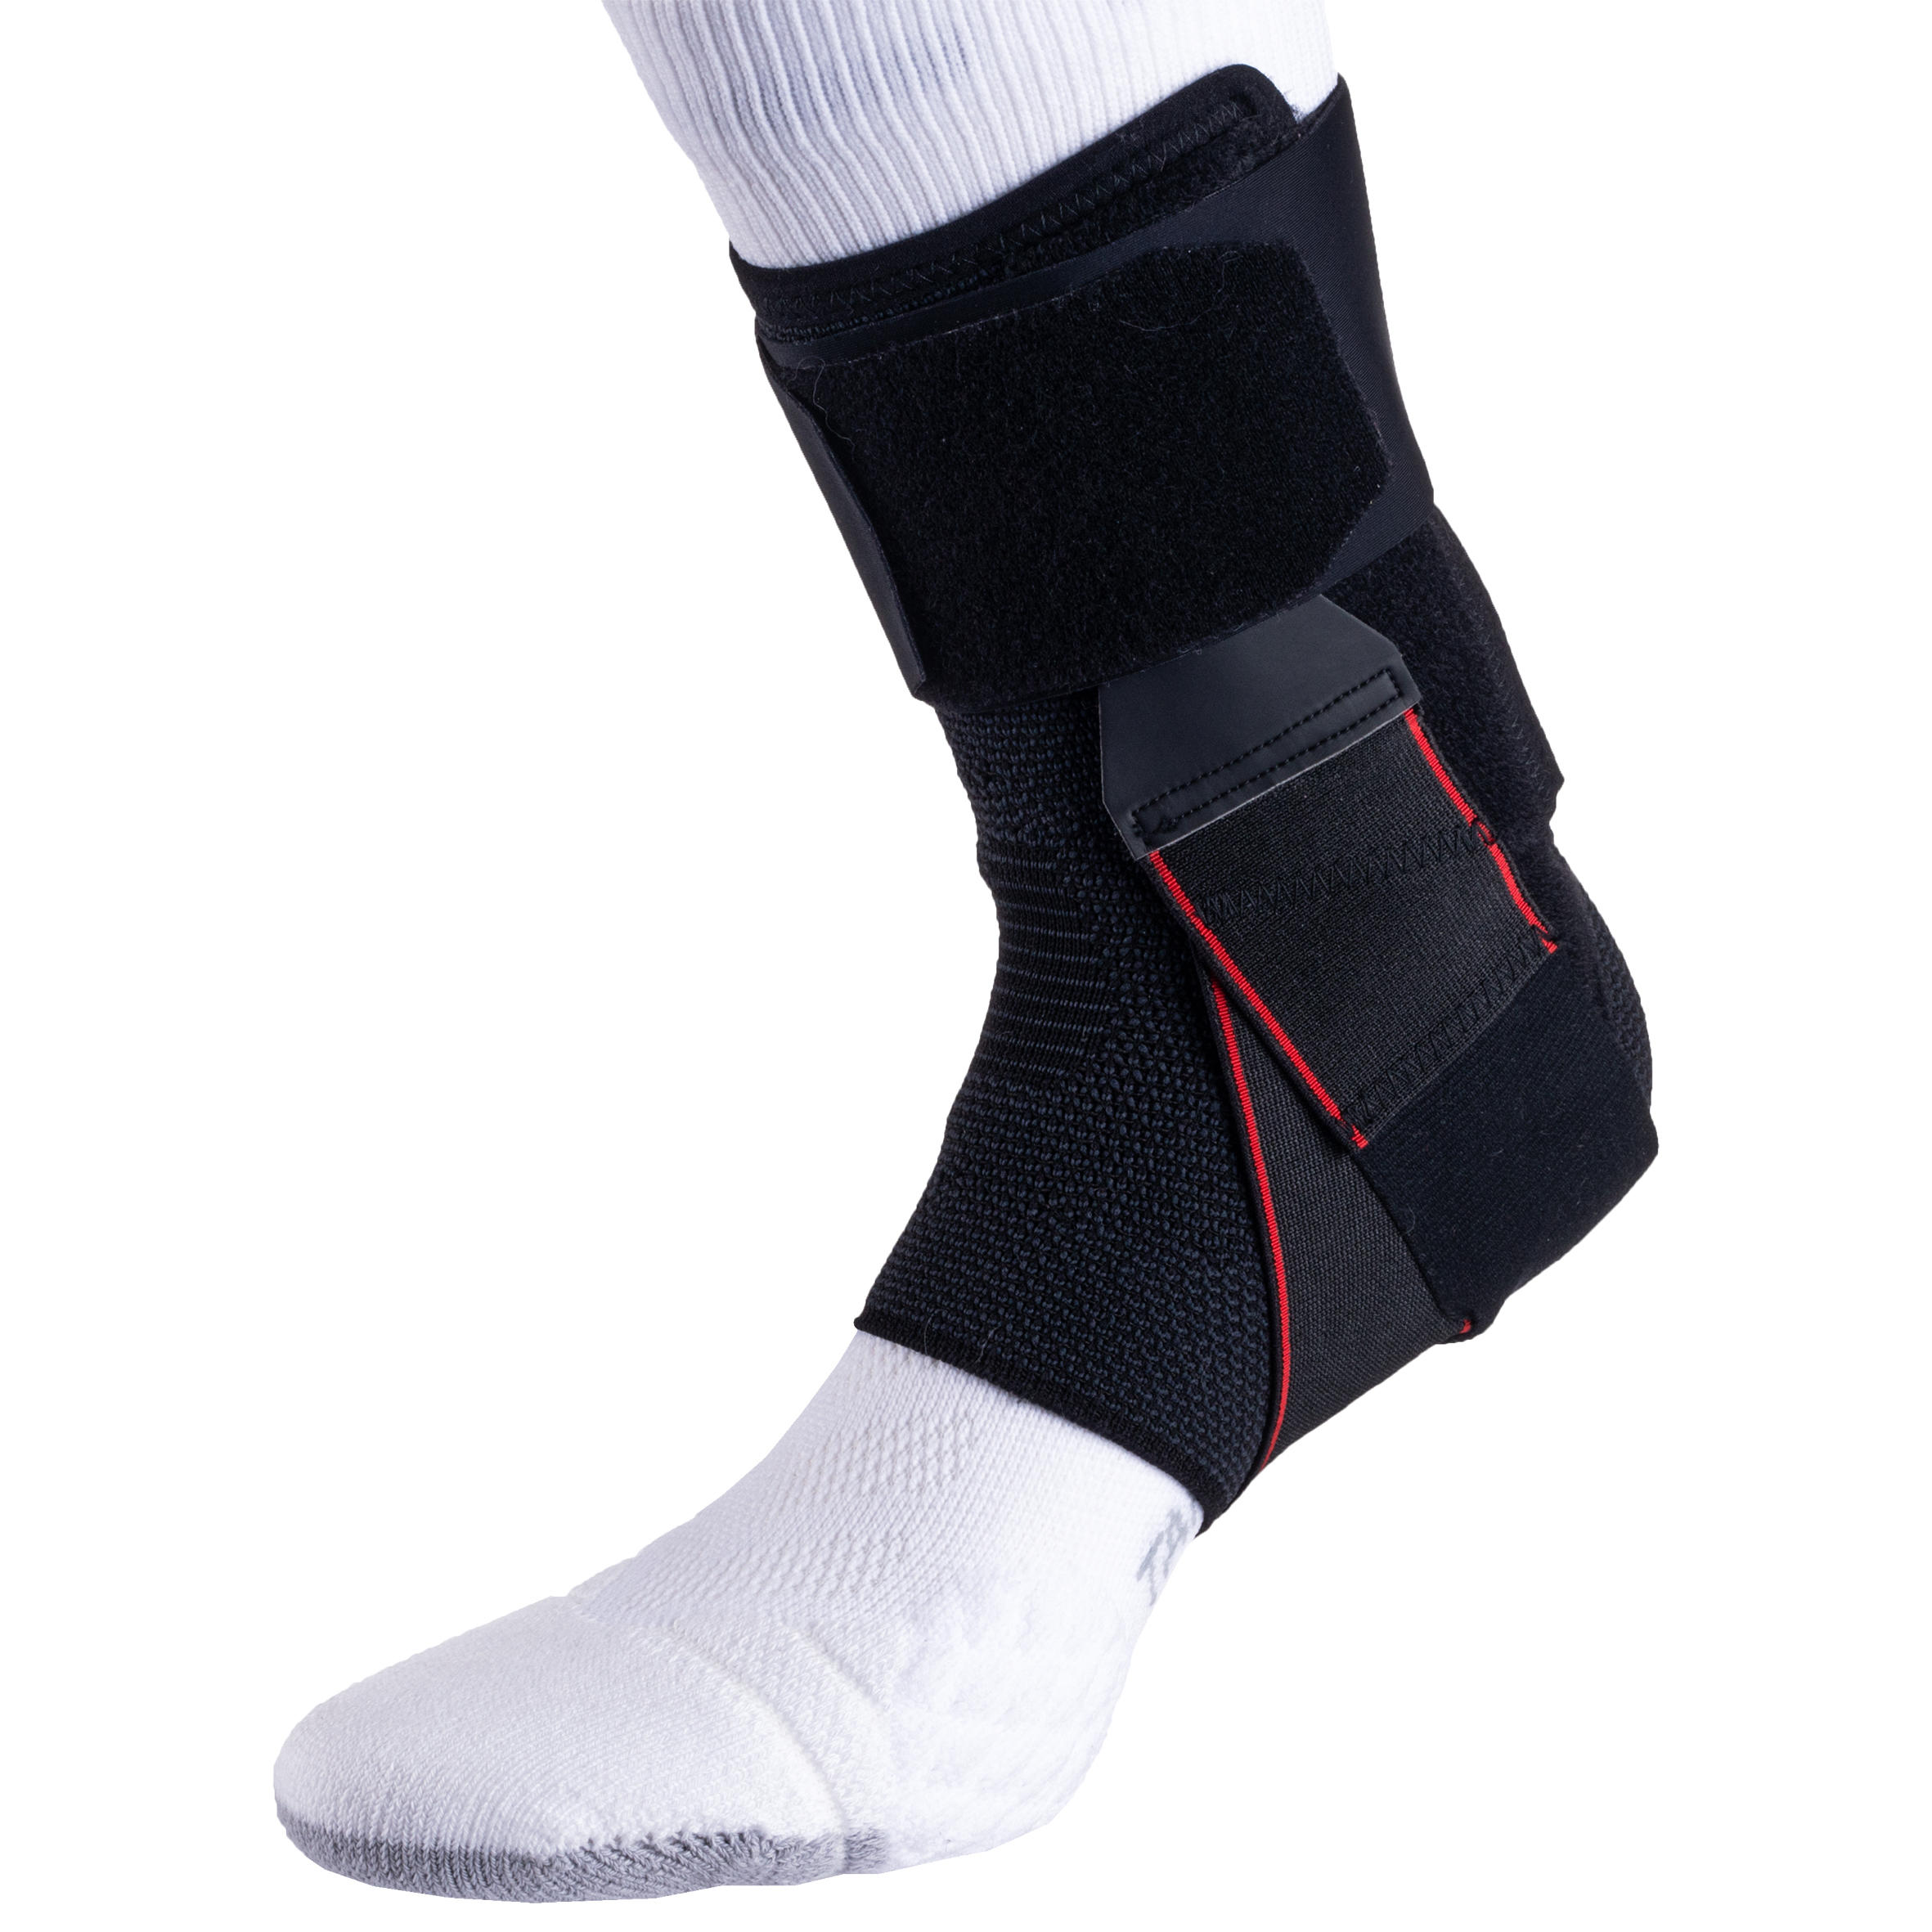 Right/Left Ankle Ligament Support - Strong 500 Dark Grey - TARMAK